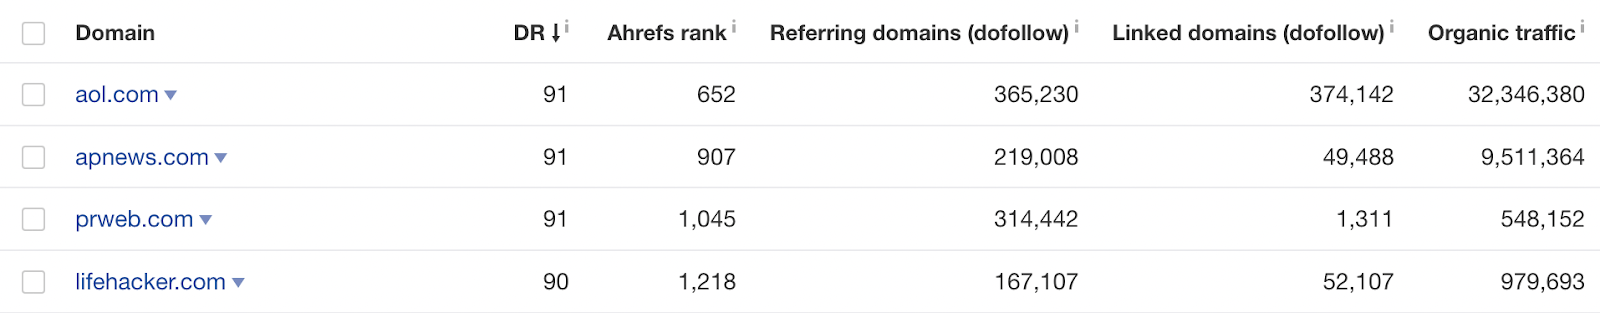 List of domains with corresponding data like DR Ahrefs Rank etc